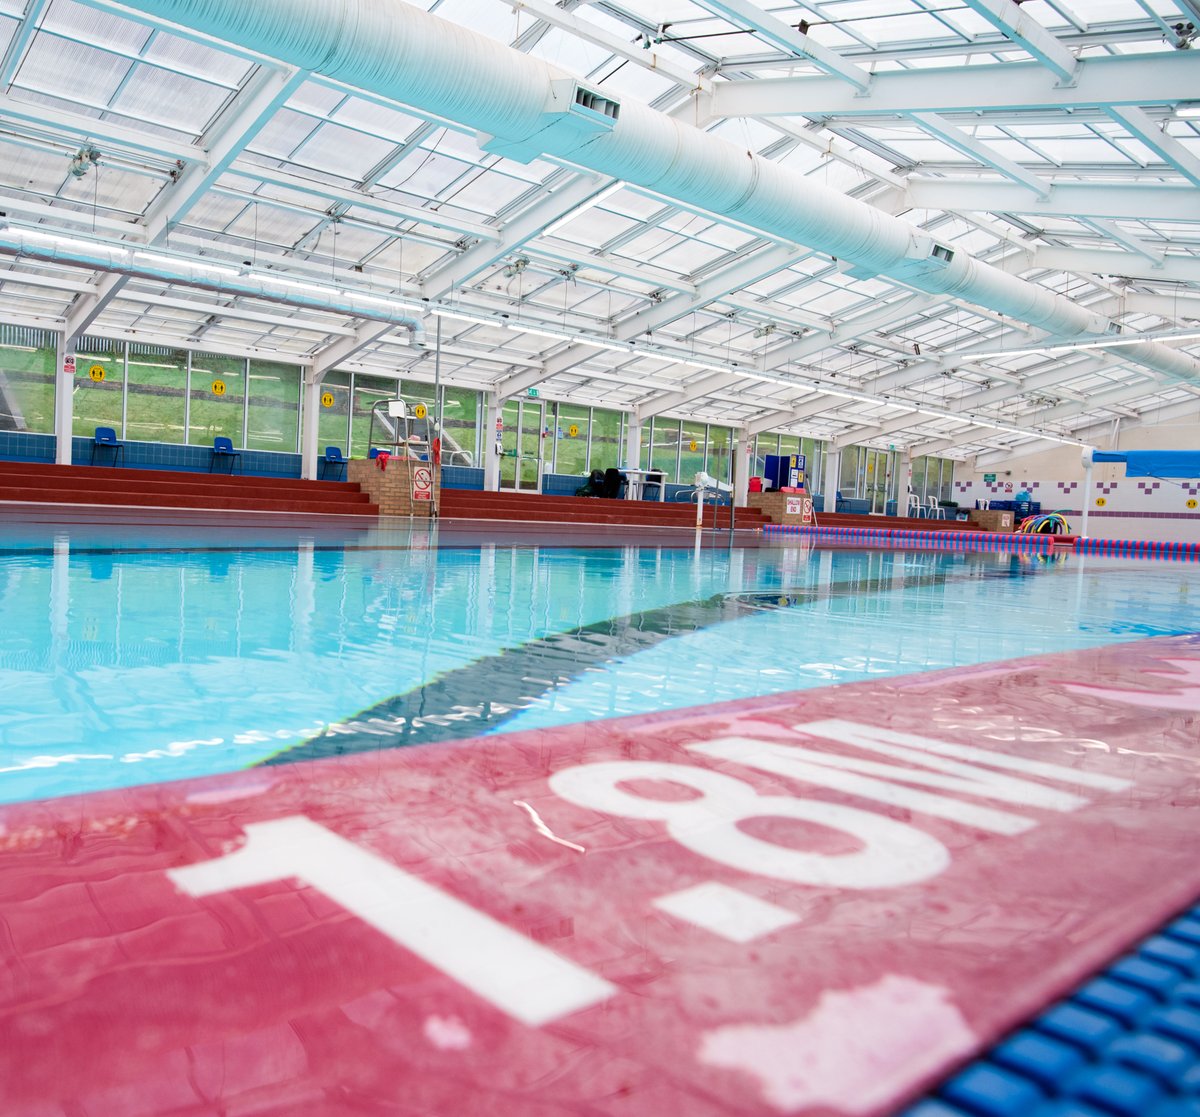 Good news! Bronwydd Swimming Pool has re-opened. Sorry for the inconvenience and thanks for bearing with us. Swimming lessons are cancelled for this evening, which means Bronwydd is open for public swimming until 4.30pm in the main pool and until 8pm in the small pool. 🏊